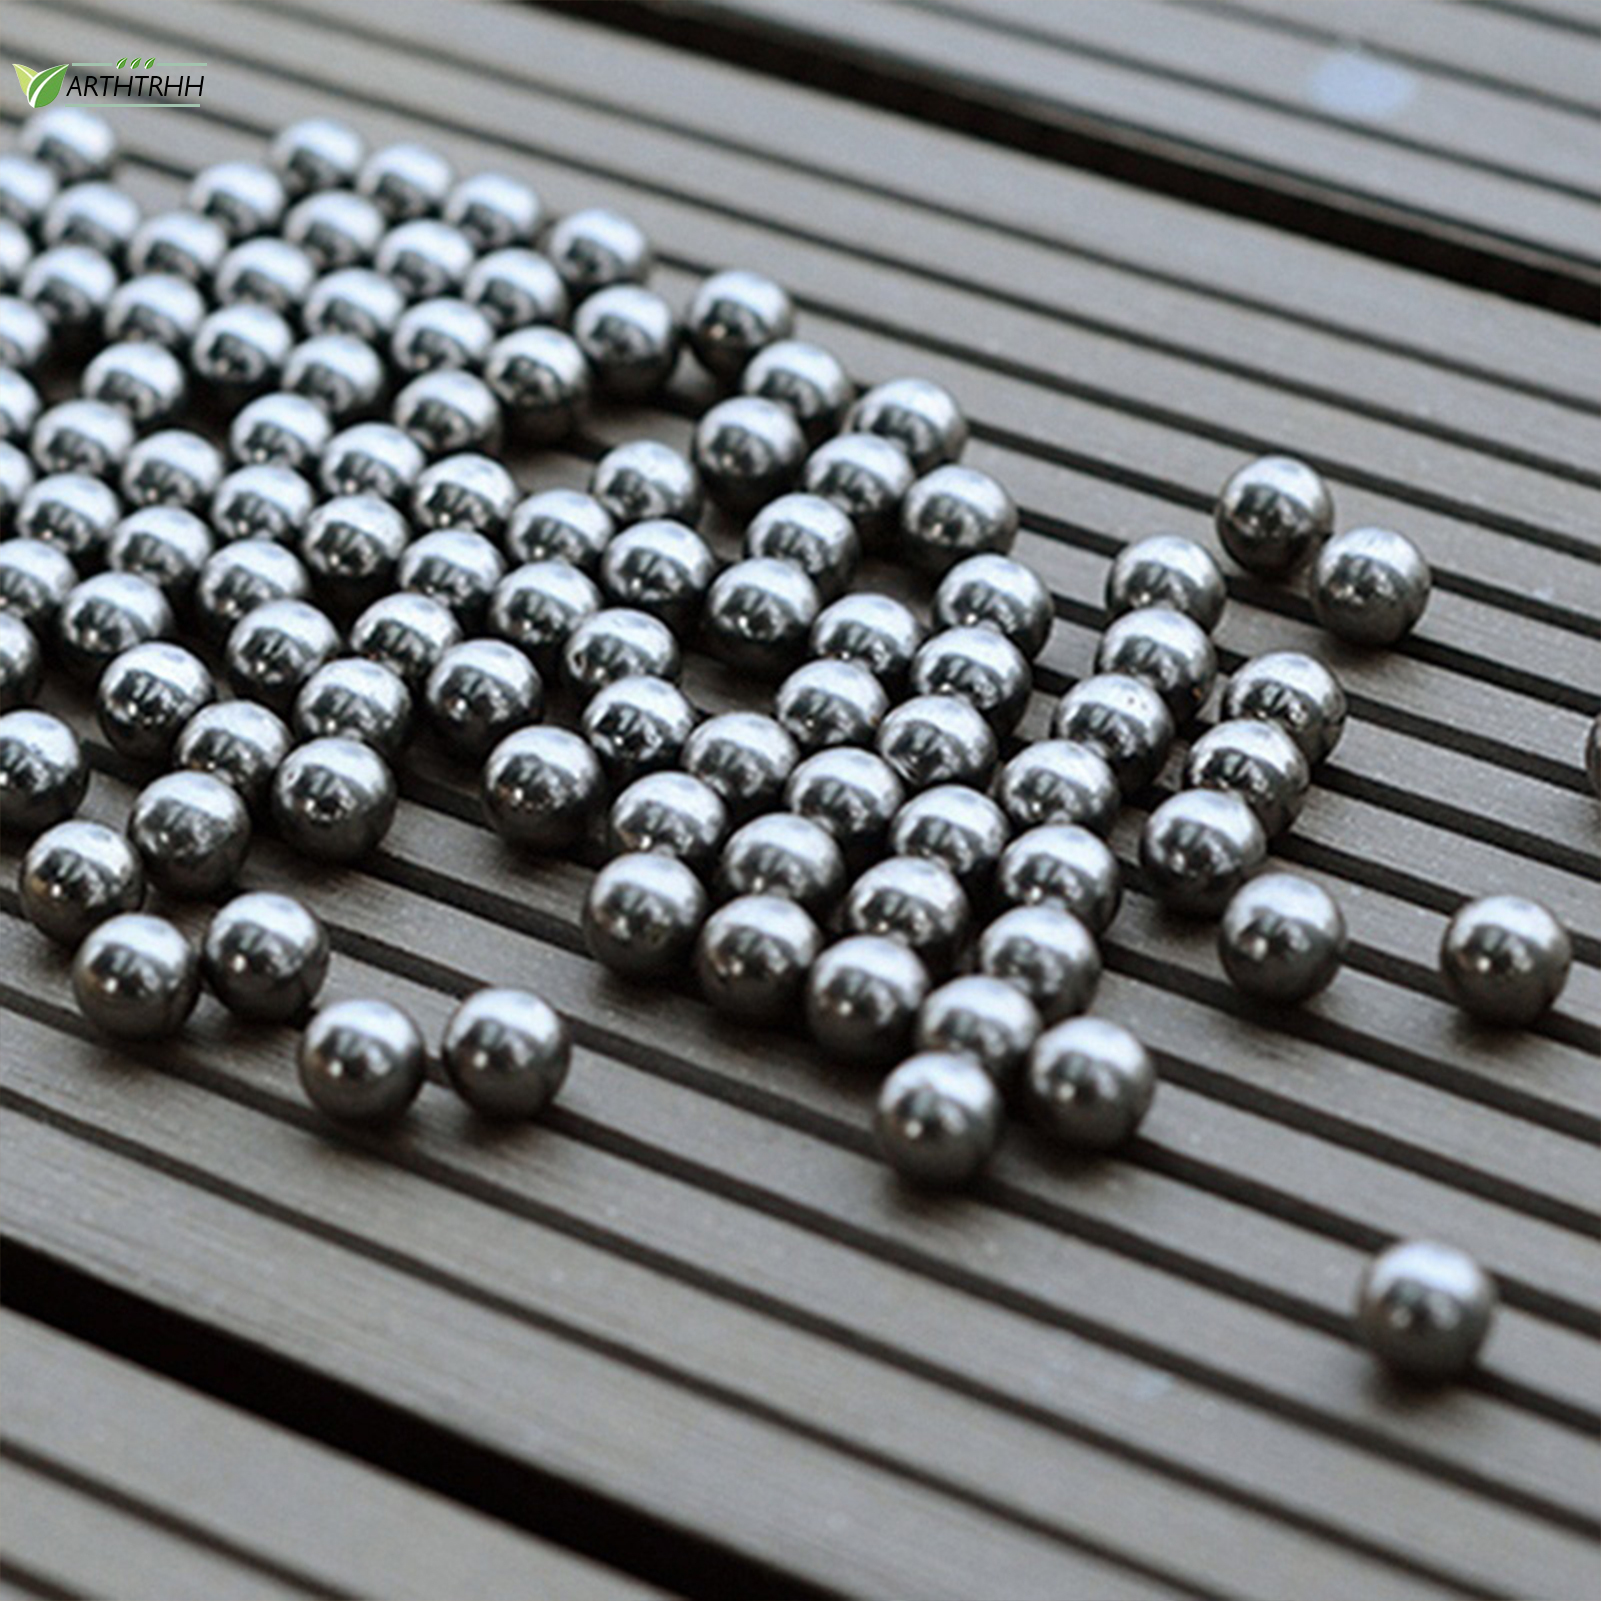 ARTH-Toys 50PCS 100PCS Stainless Steel Bearing Ball Smooth Surface Not